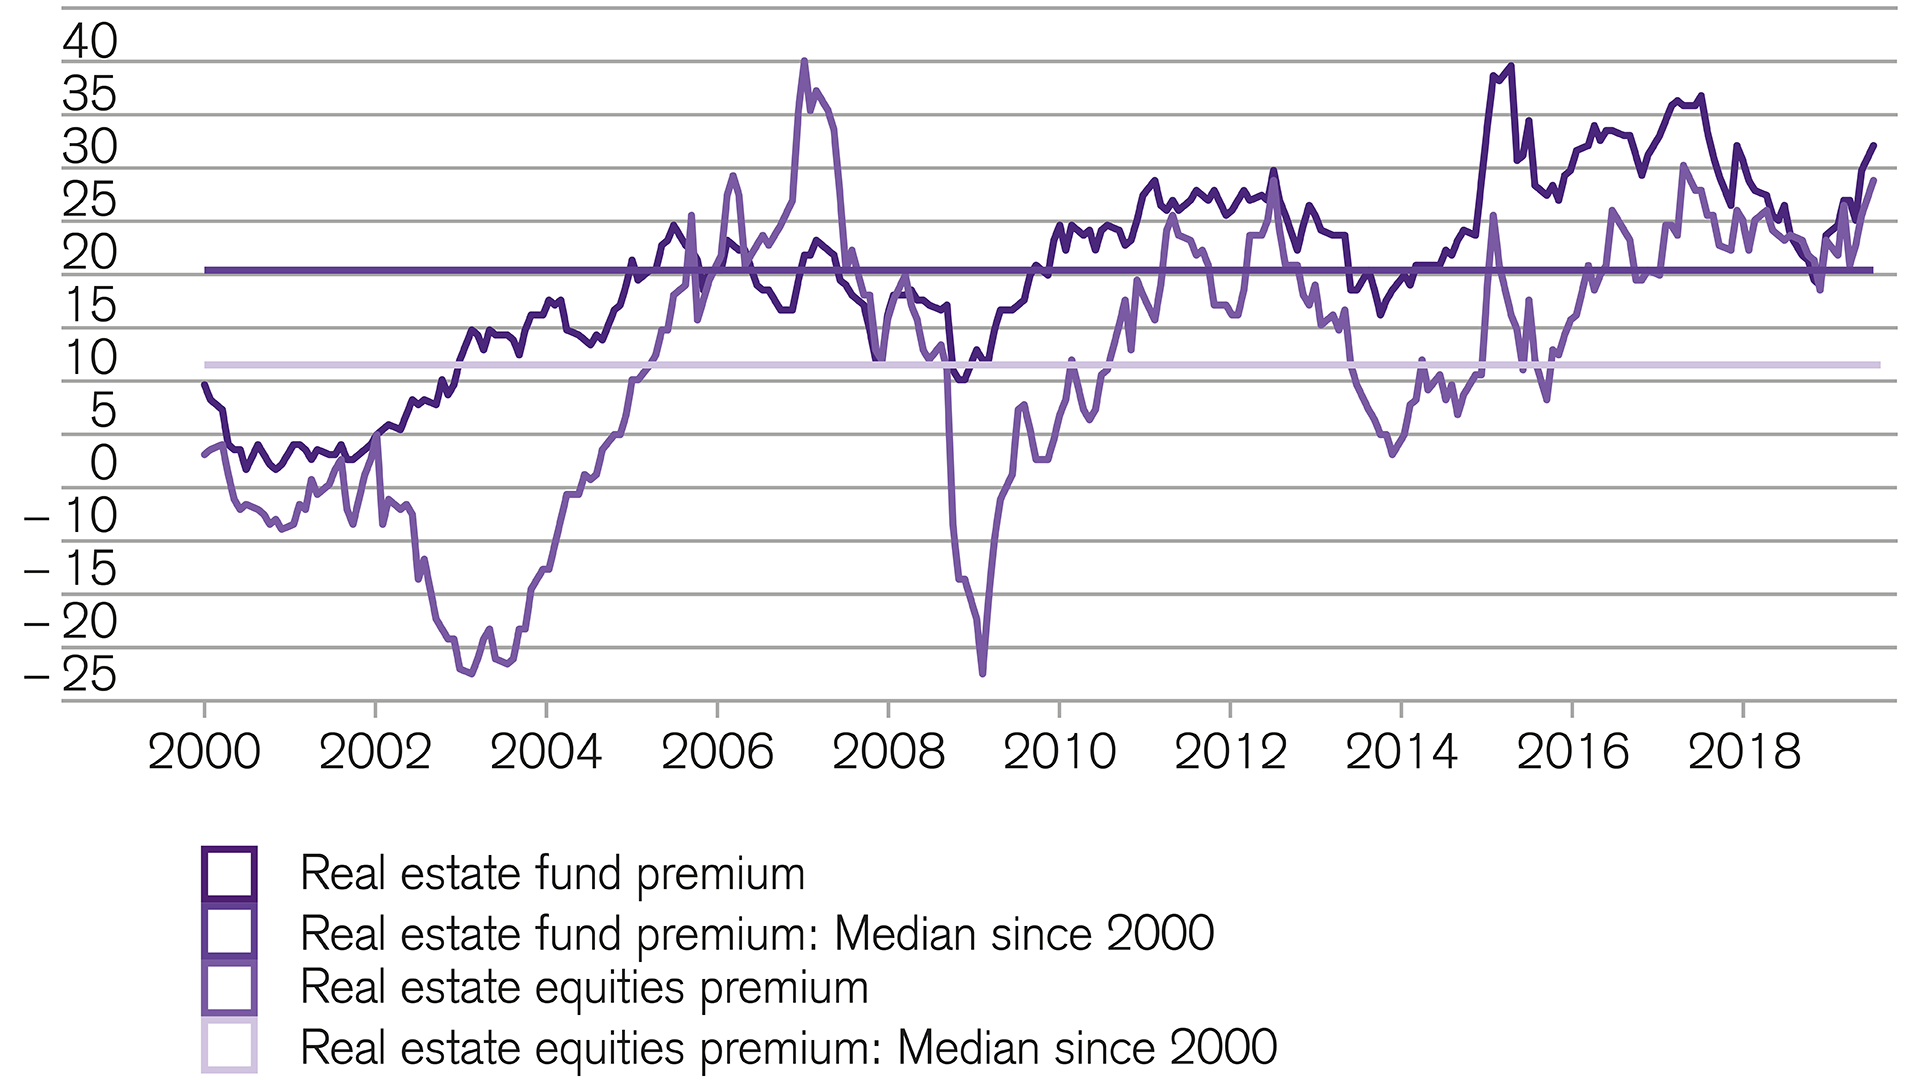 Swiss real estate equities remain attractive